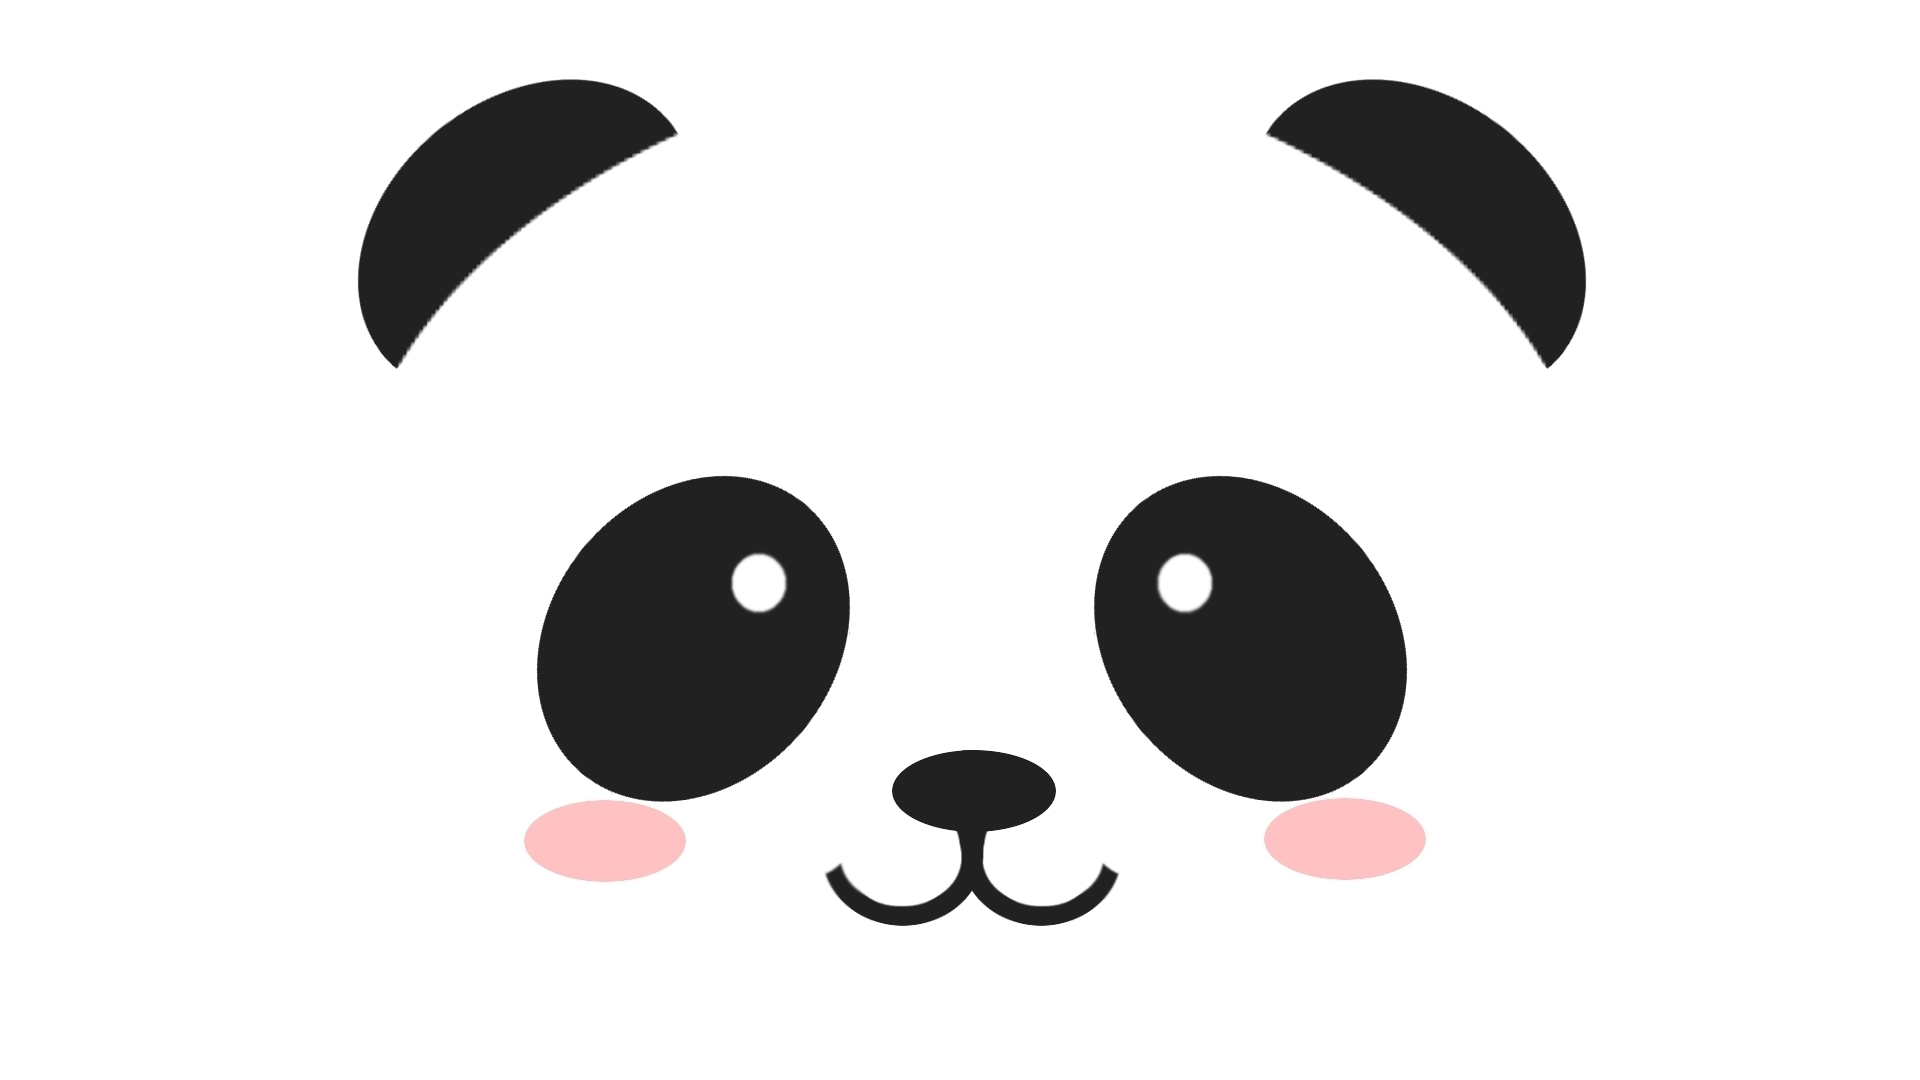 cute panda backgrounds for twitter